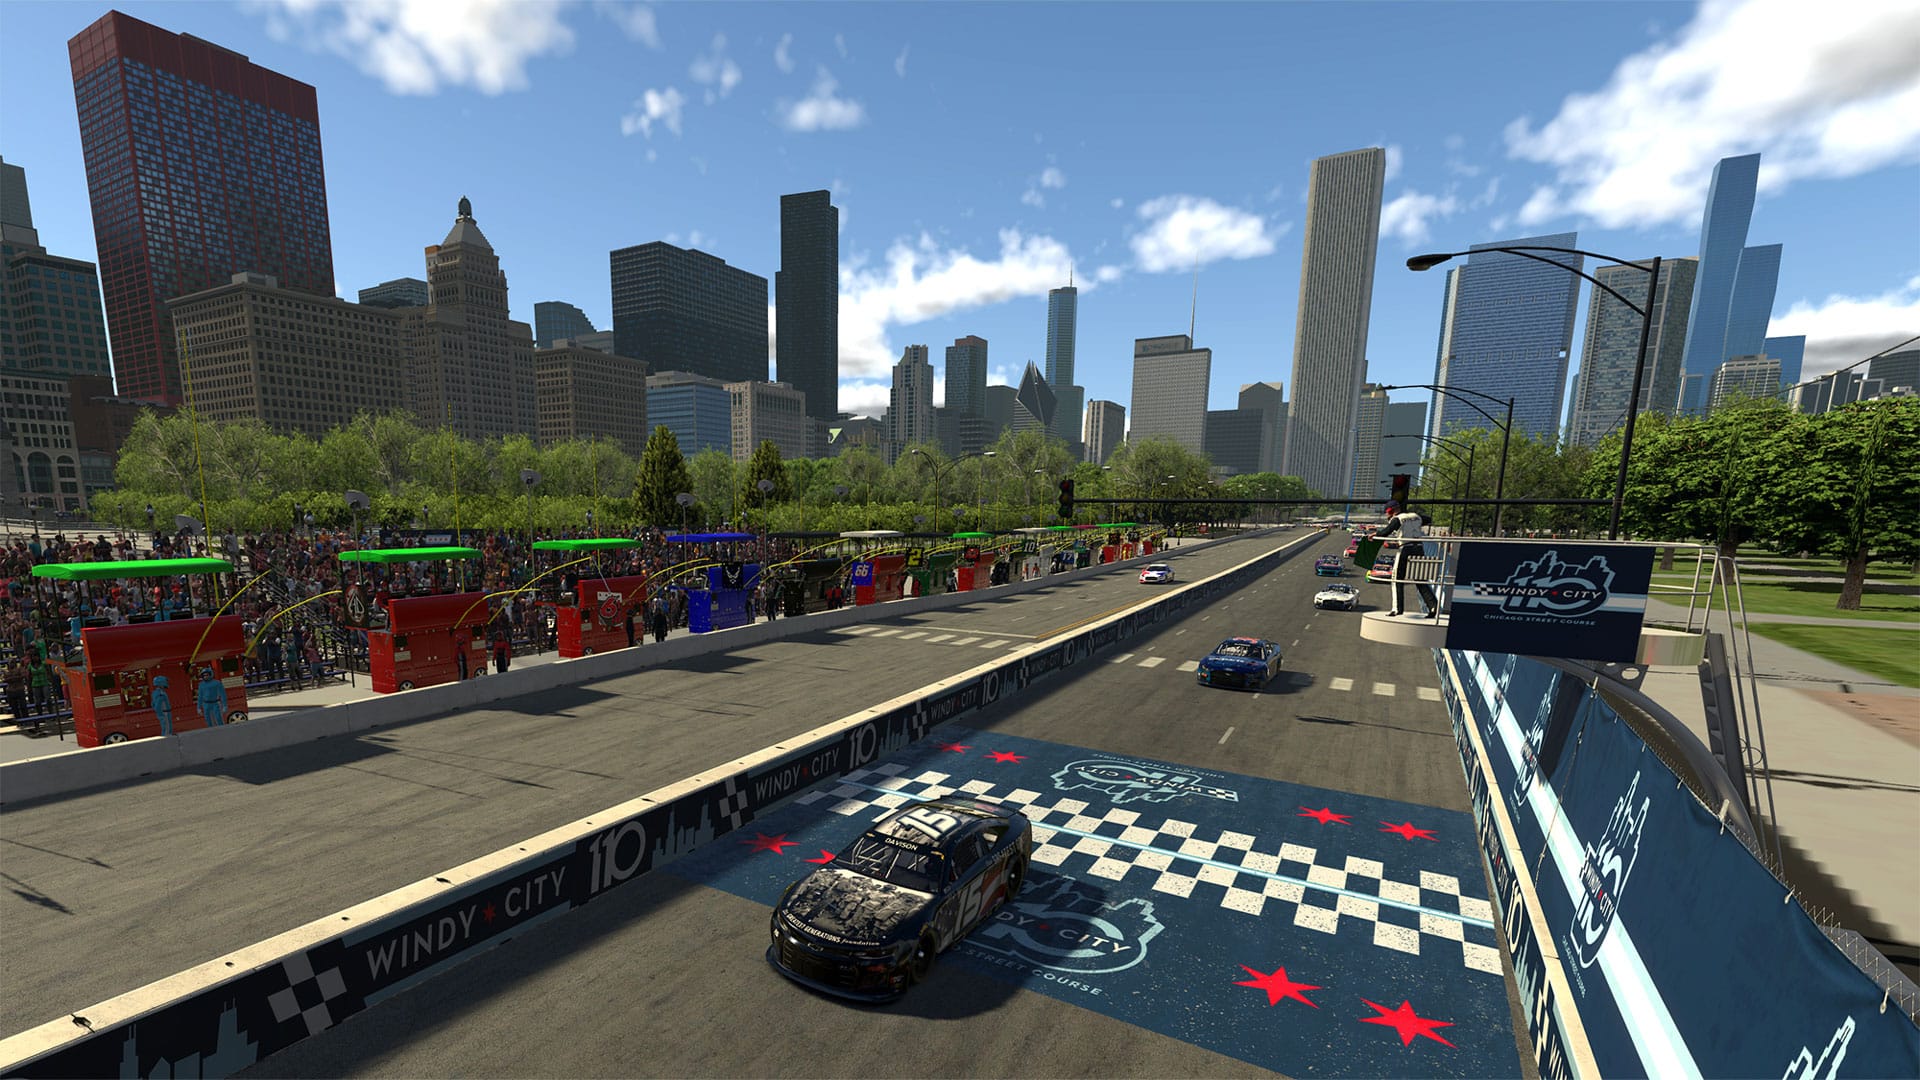 NASCAR's first ever street race to be held on new track in Chicago